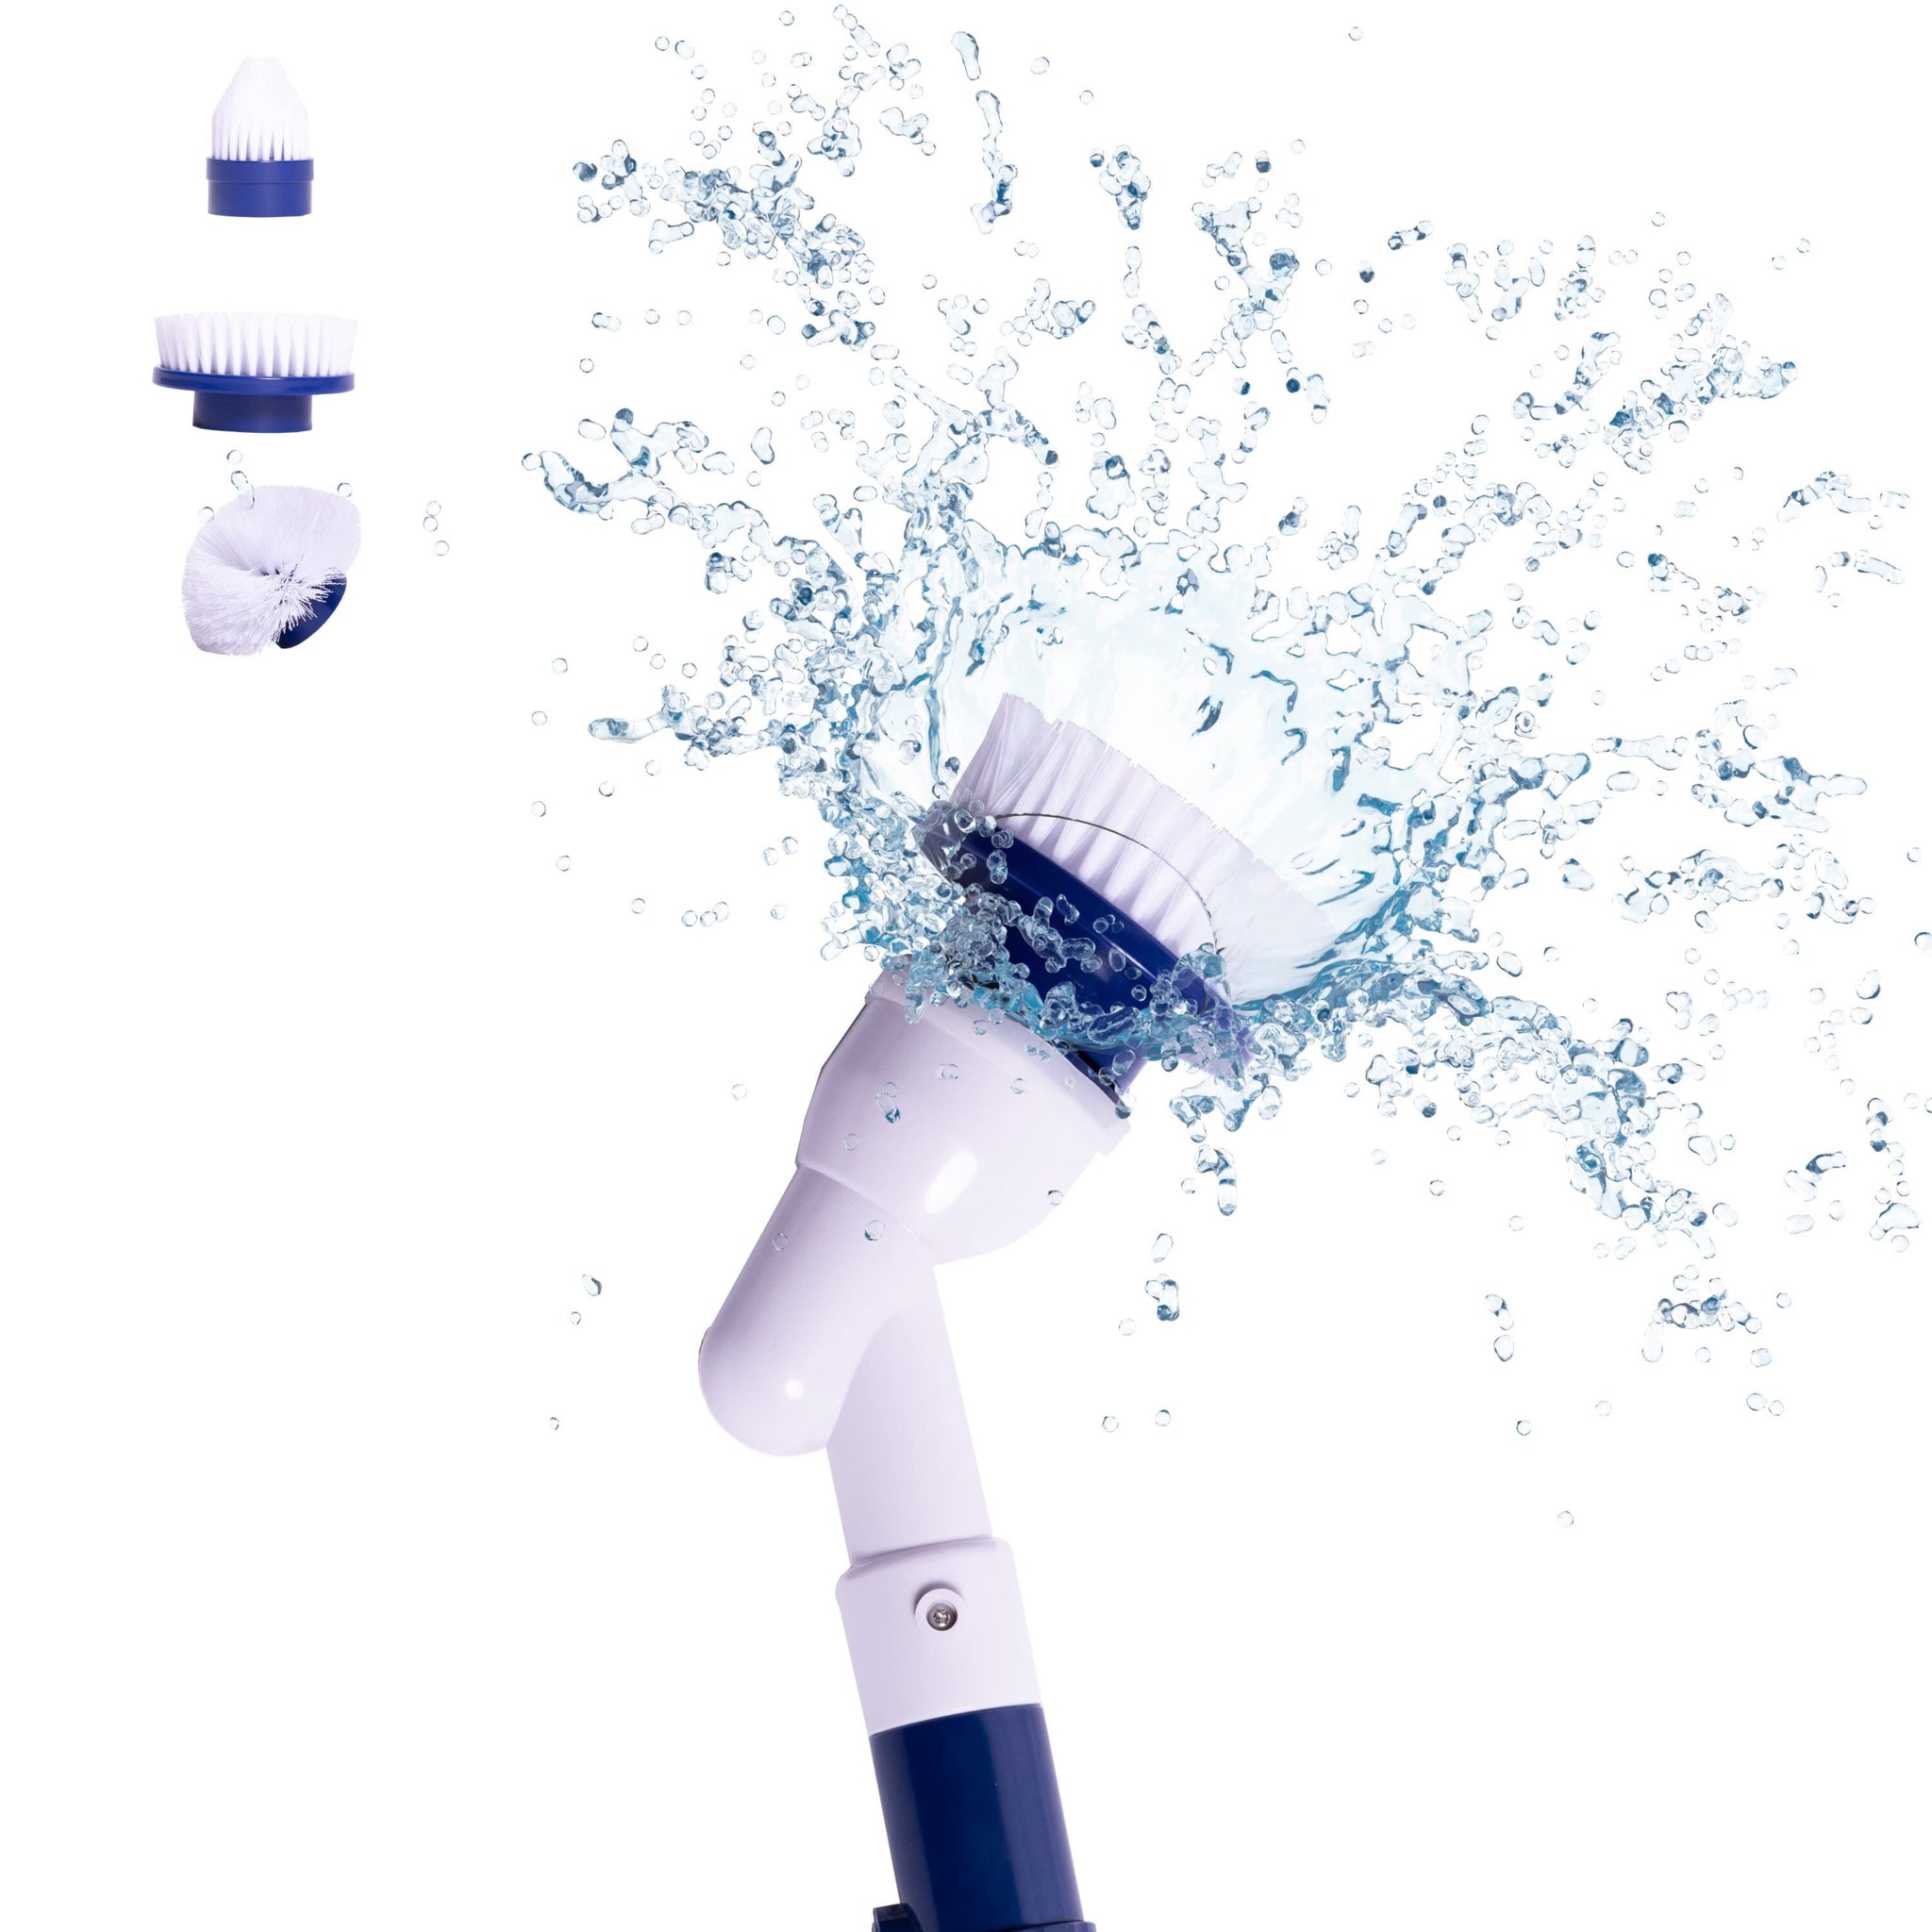 The Handheld Rechargeable Power Scrubber